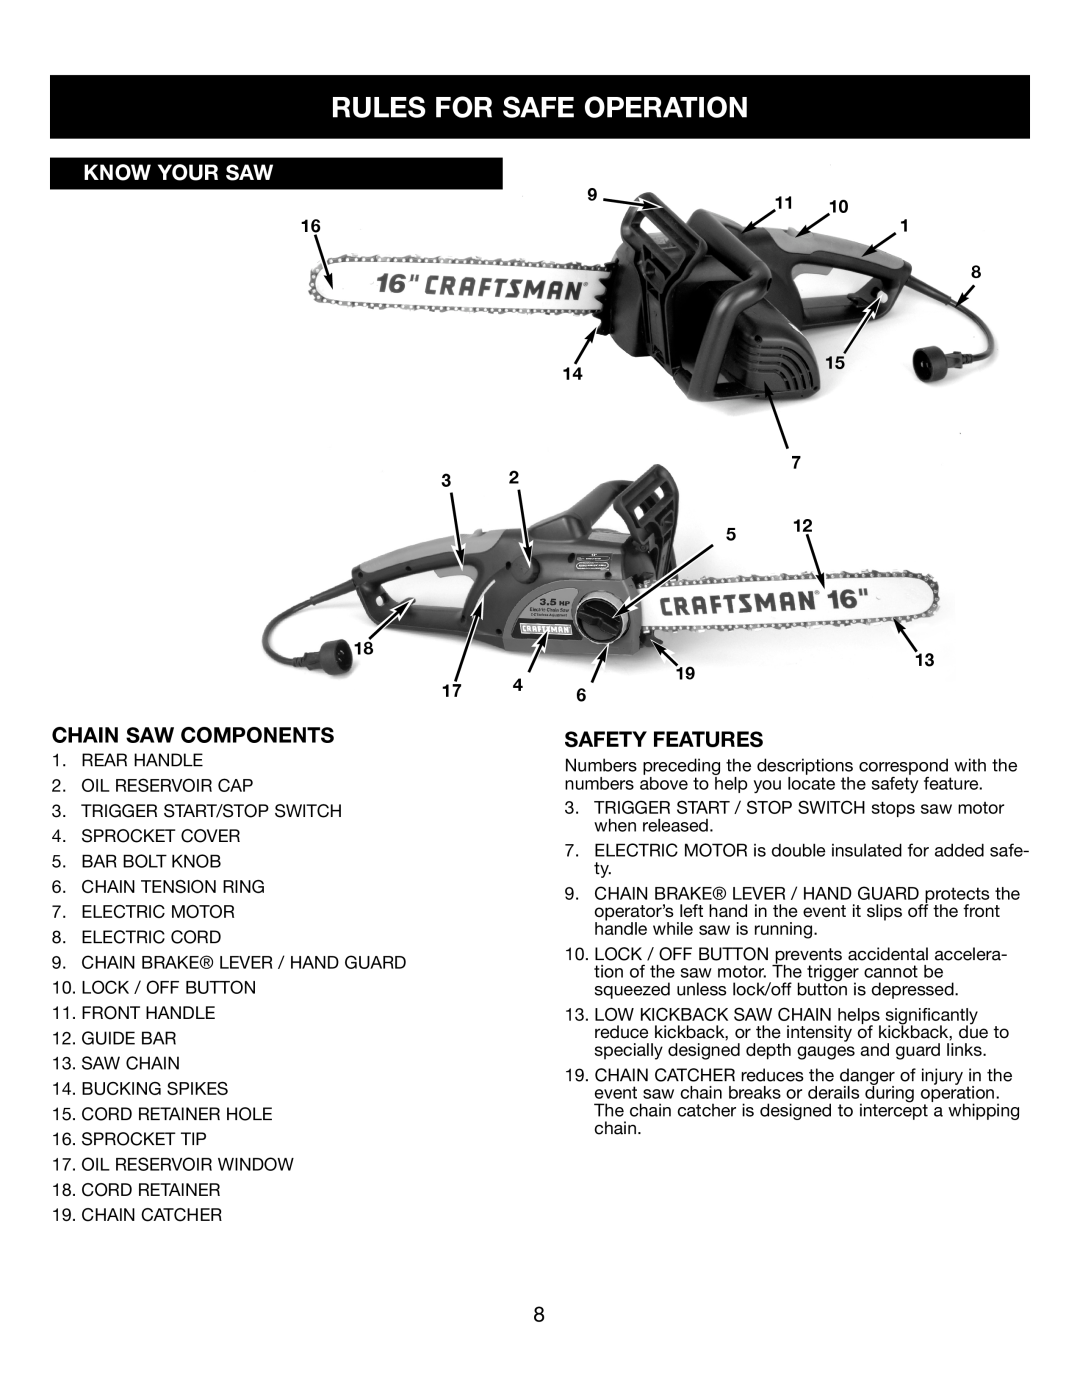 Craftsman 316.34107 manual Know Your Saw, Chain Saw Components, Safety Features, Rules For Safe Operation, 1415 